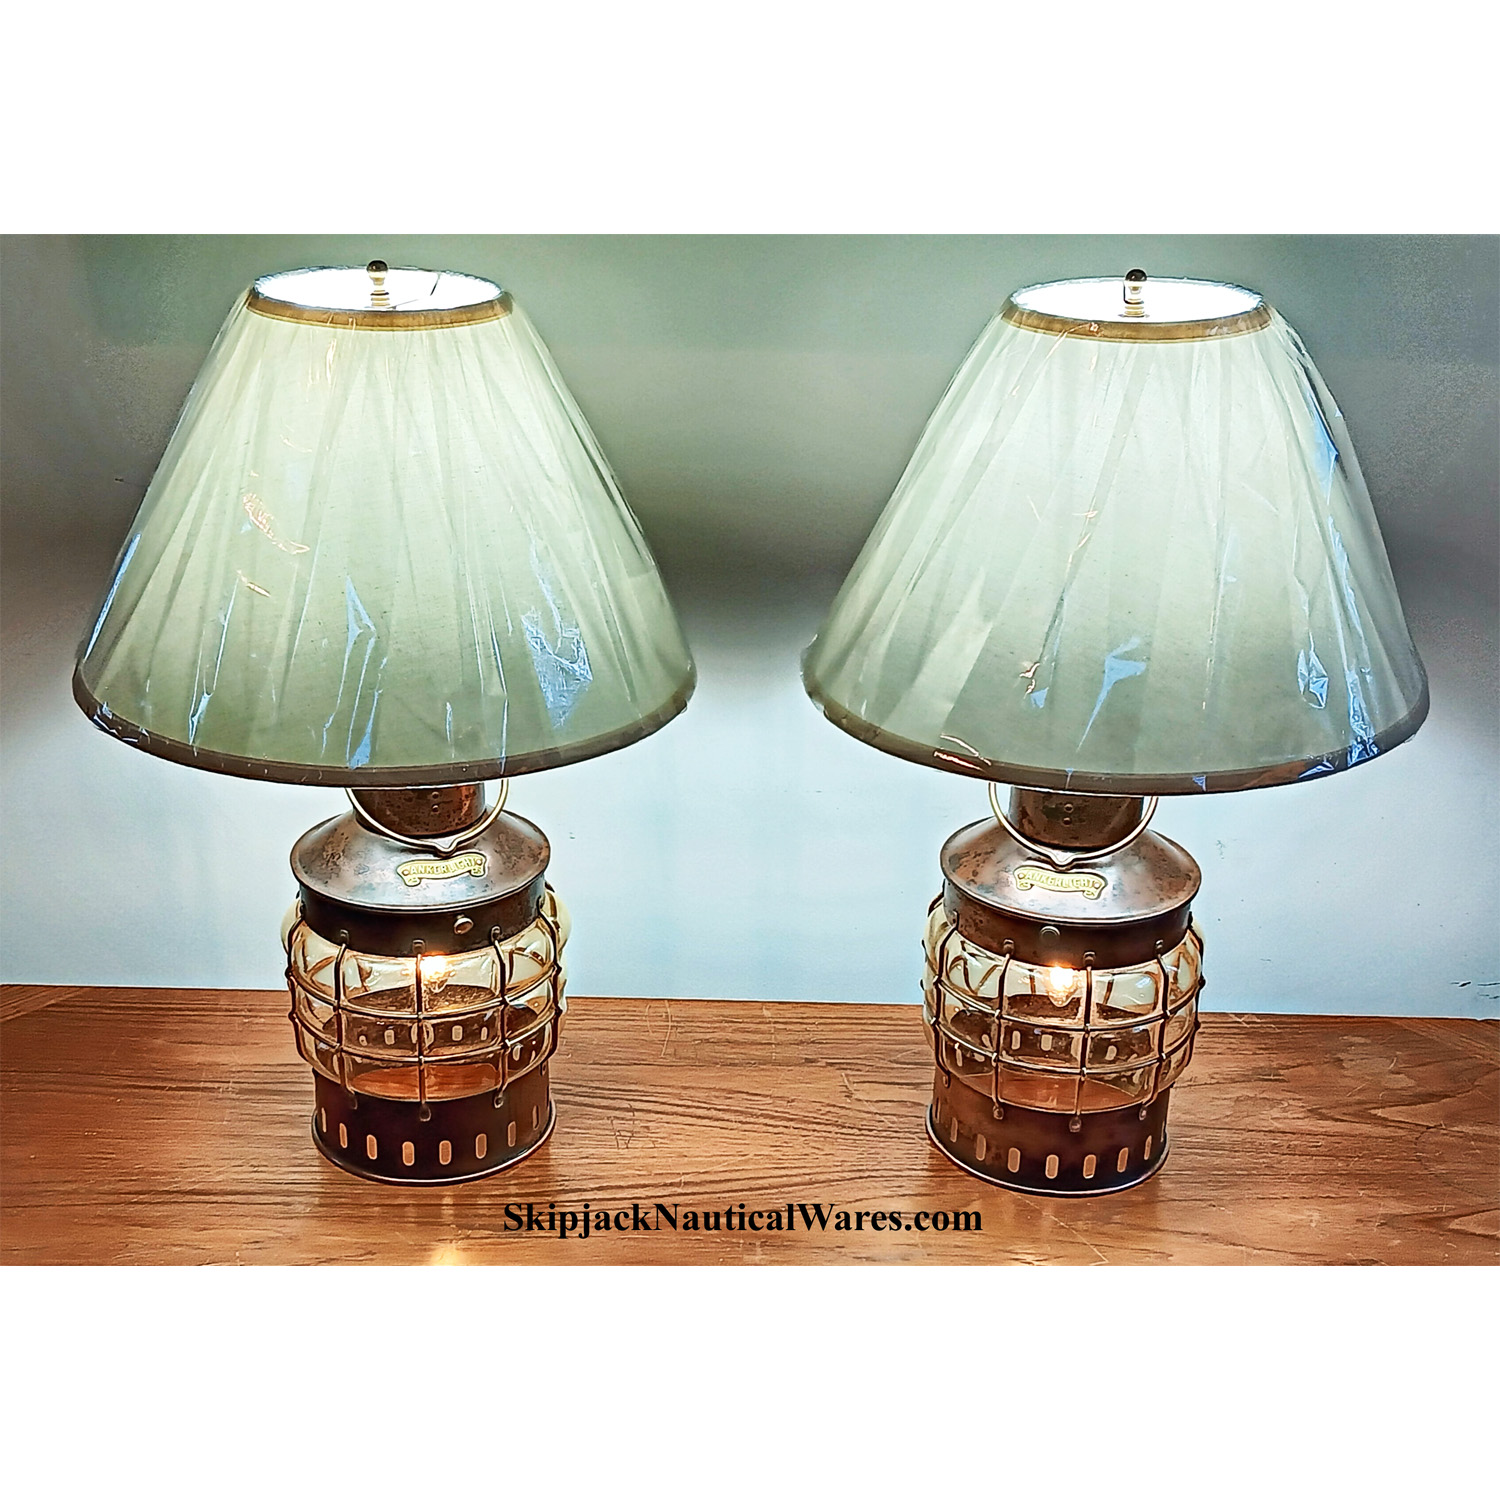 Exceptional Nautical Dutch Made Ankerlicht Table Lamp: Skipjack Nautical  Wares